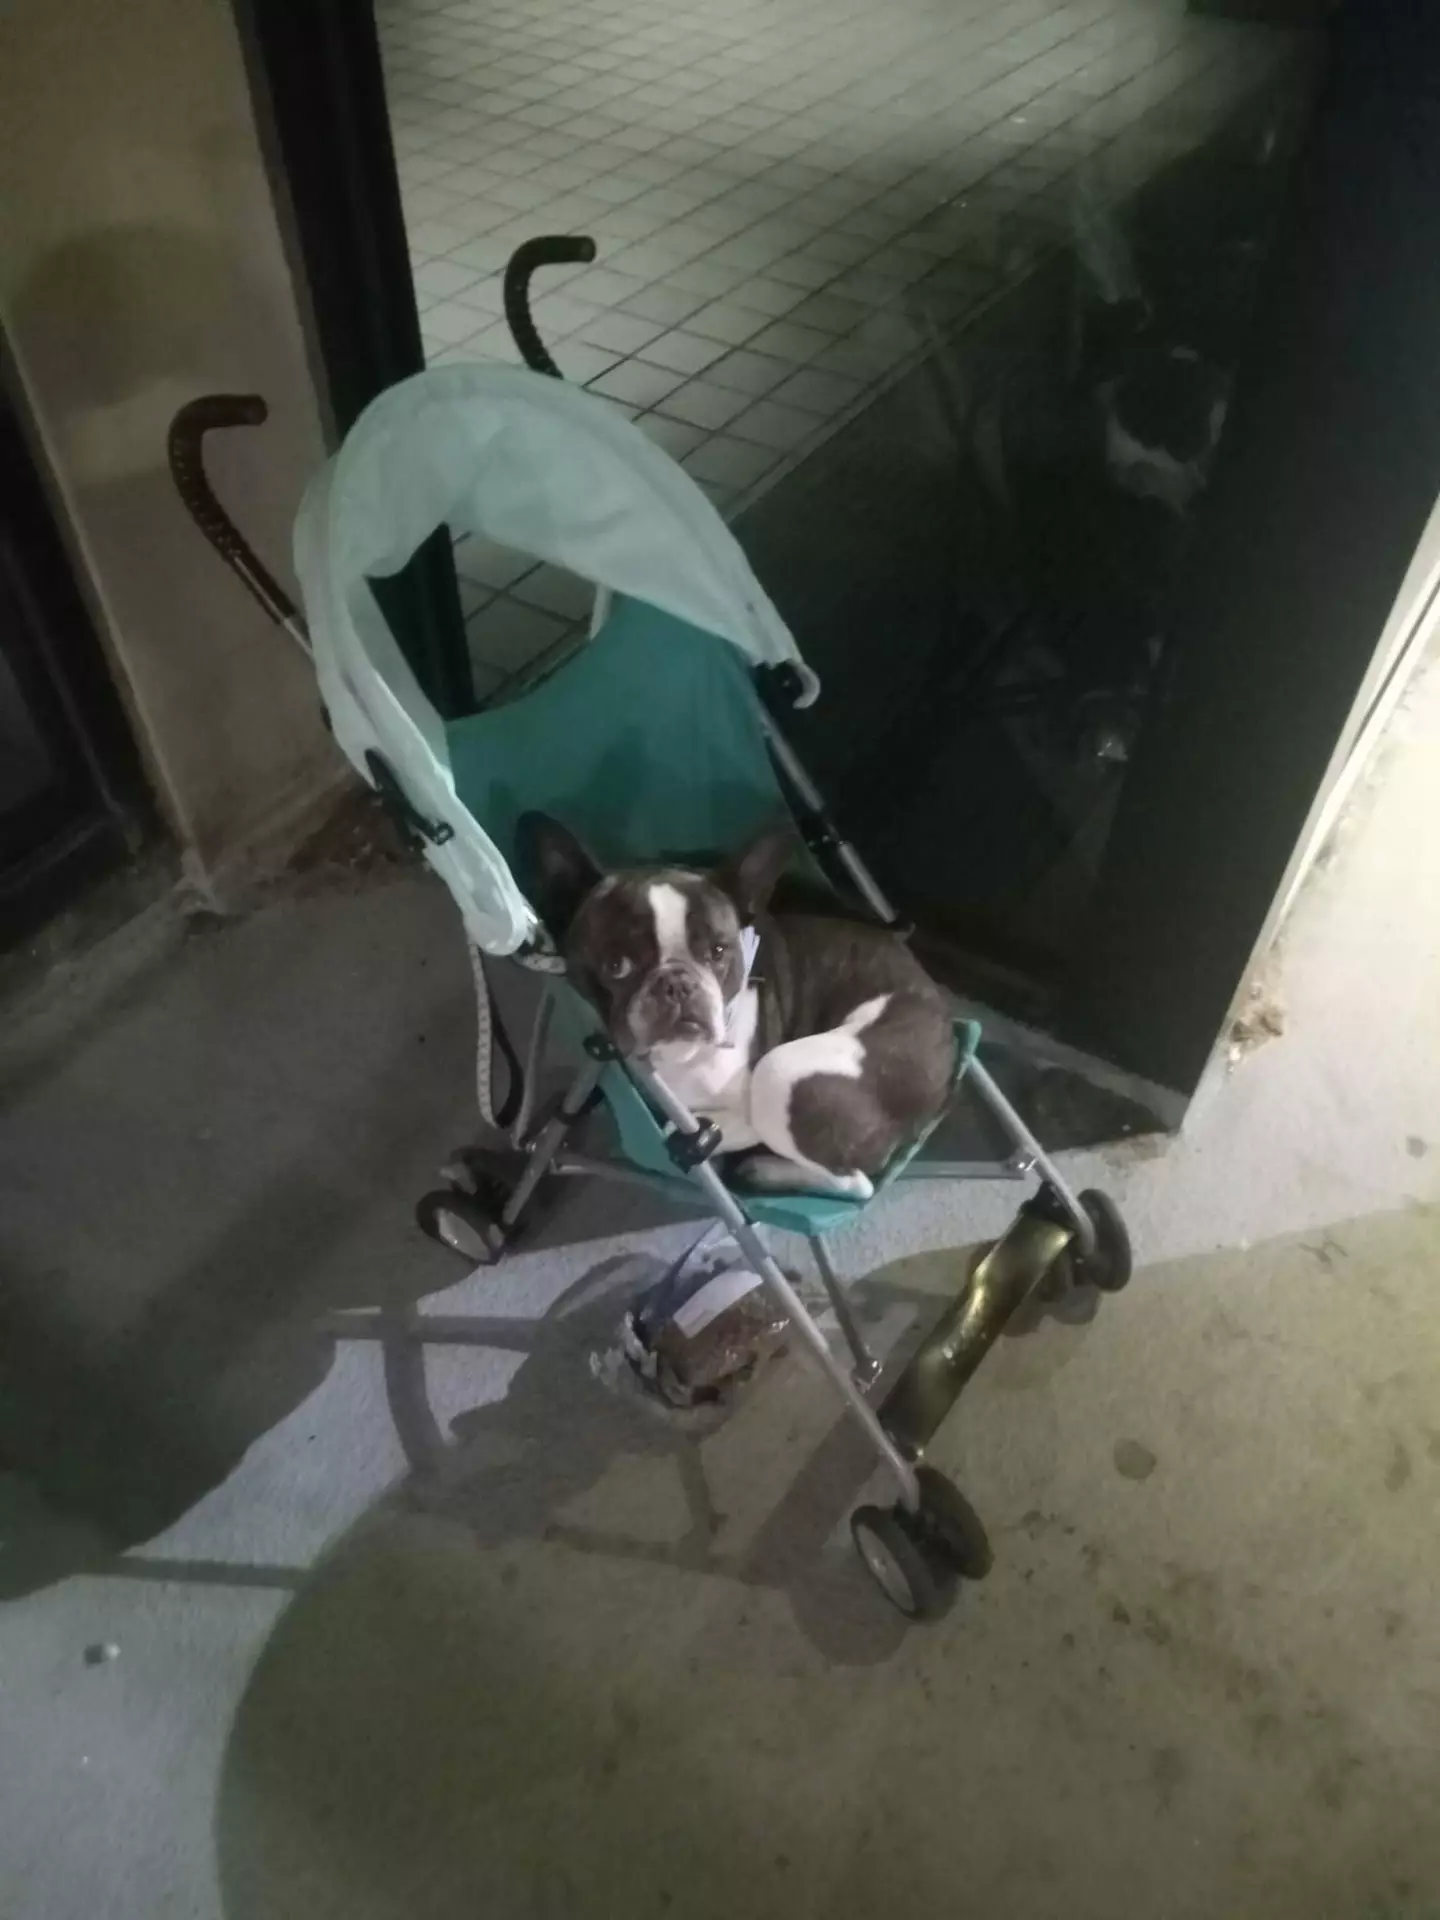 It had been left in a stroller in a car park.